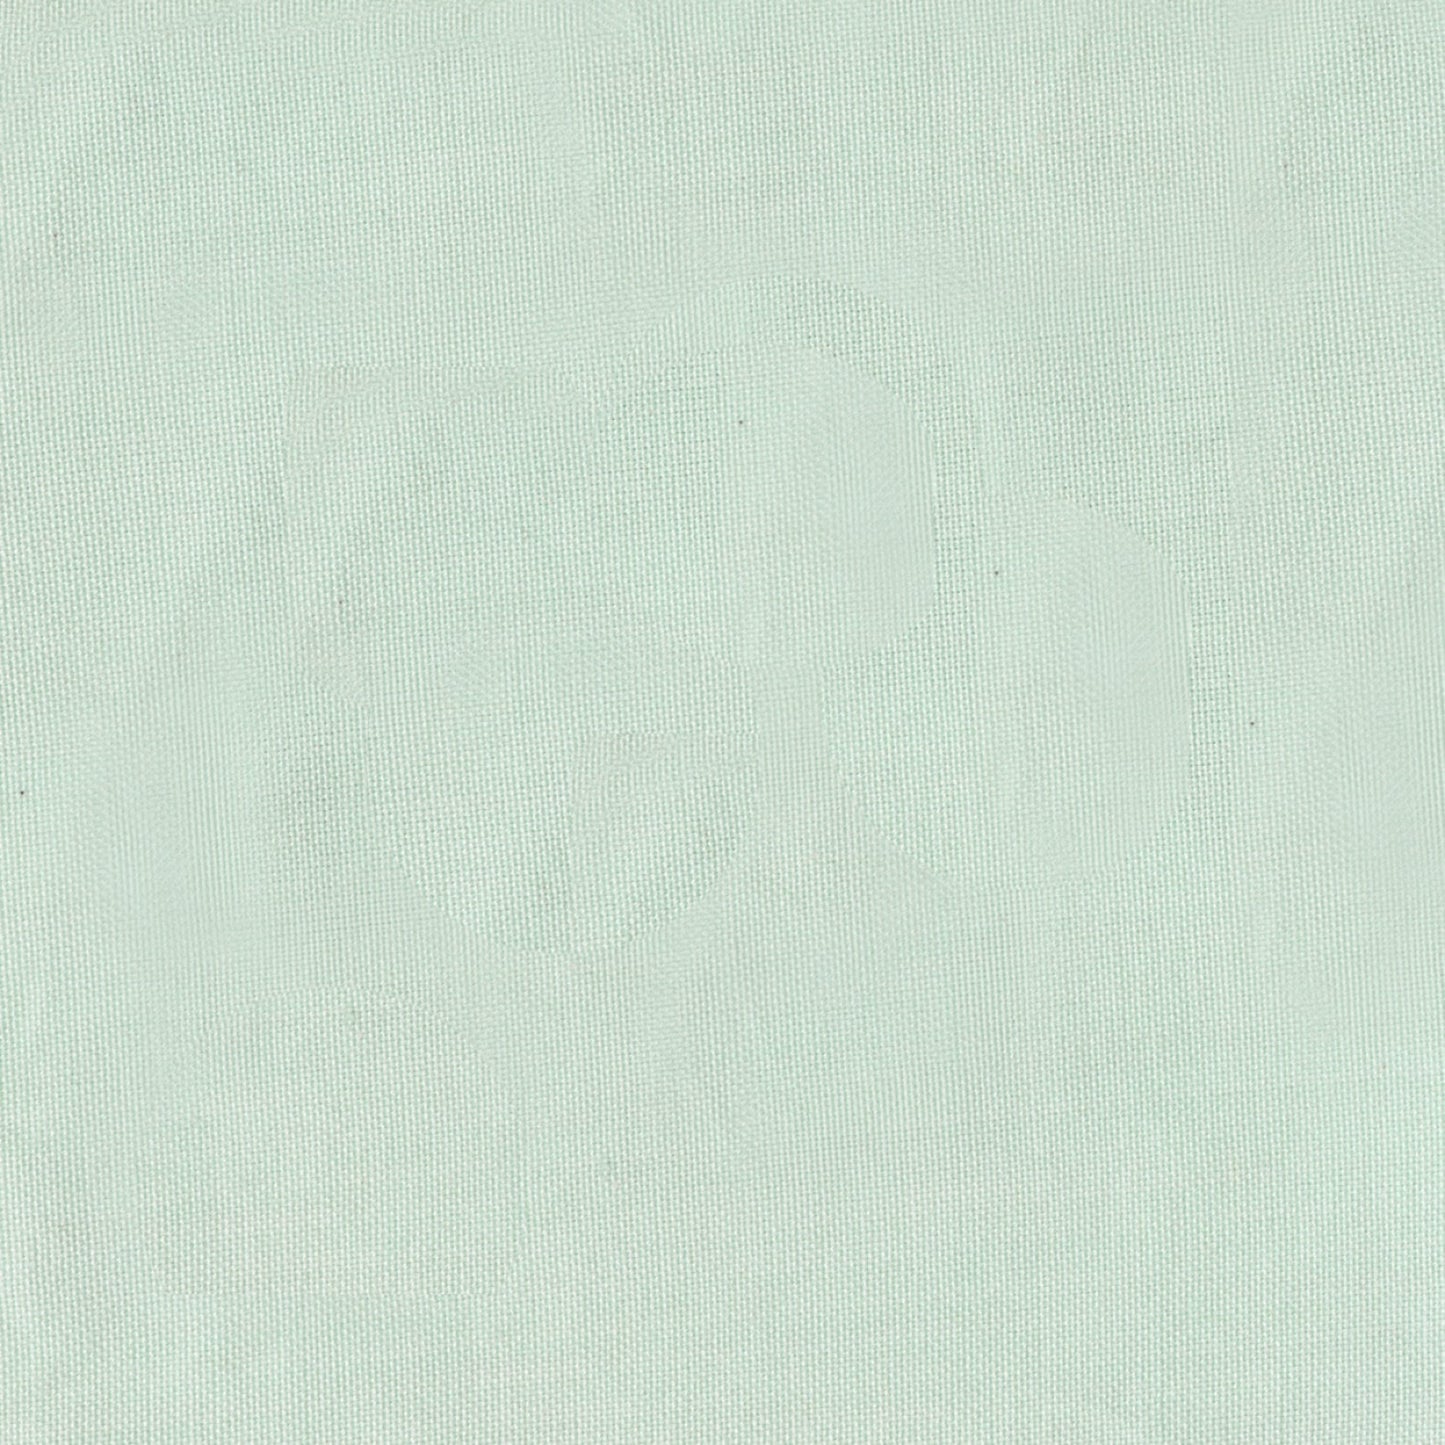 Manufacturer: Windham Fabrics Designer: Another Point of View Collection: Artisan Solids Print Name: White/Aqua Material: 100% Cotton  Weight: Quilting  SKU: WIND 40171-59 Width: 44 inches